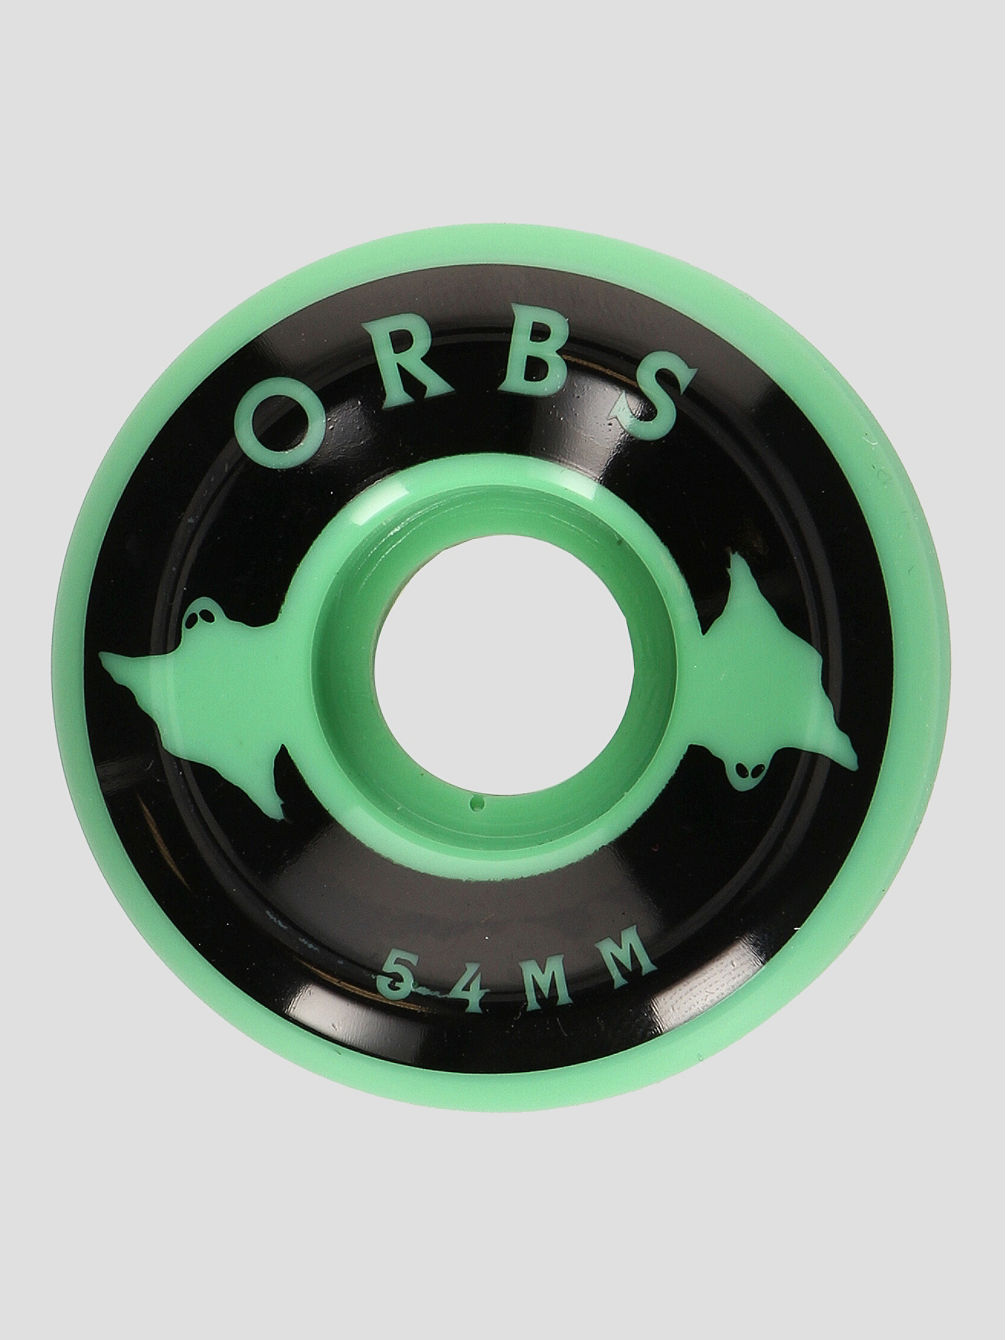 Orbs Specters - Conical - 99A 54mm Roues